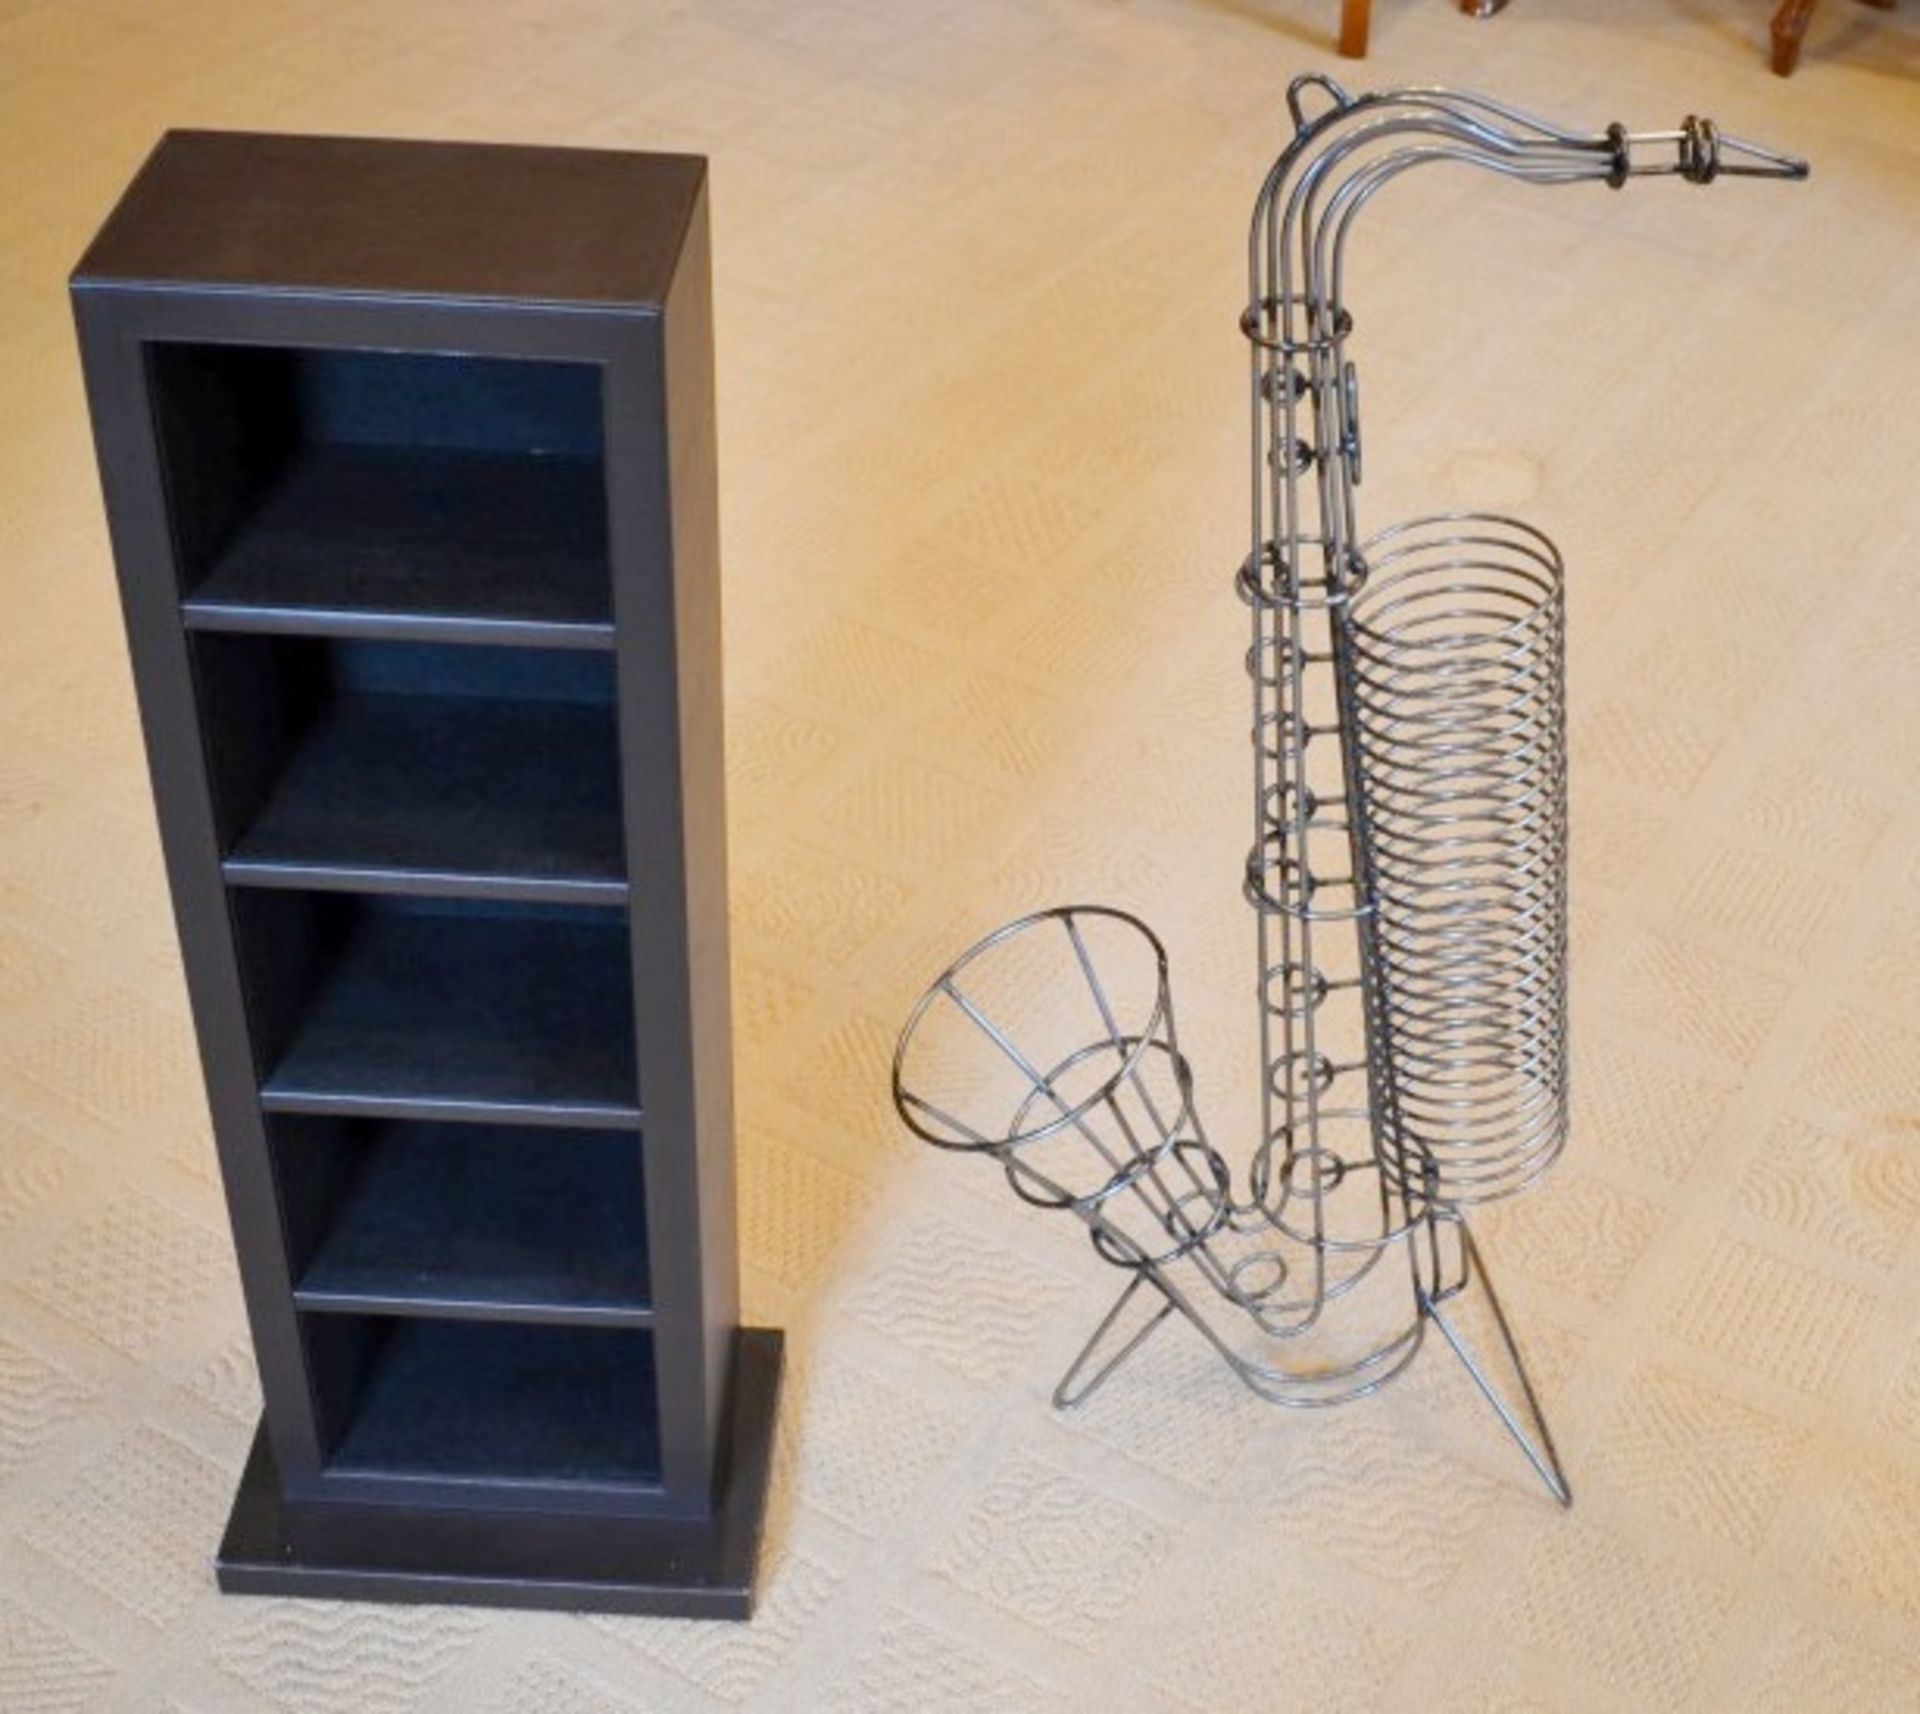 2 x CD Racks - Includes 1 x Saxaphone Shaped (H90cm), and 1 x In Faux Leather (H83cm)- Both From A